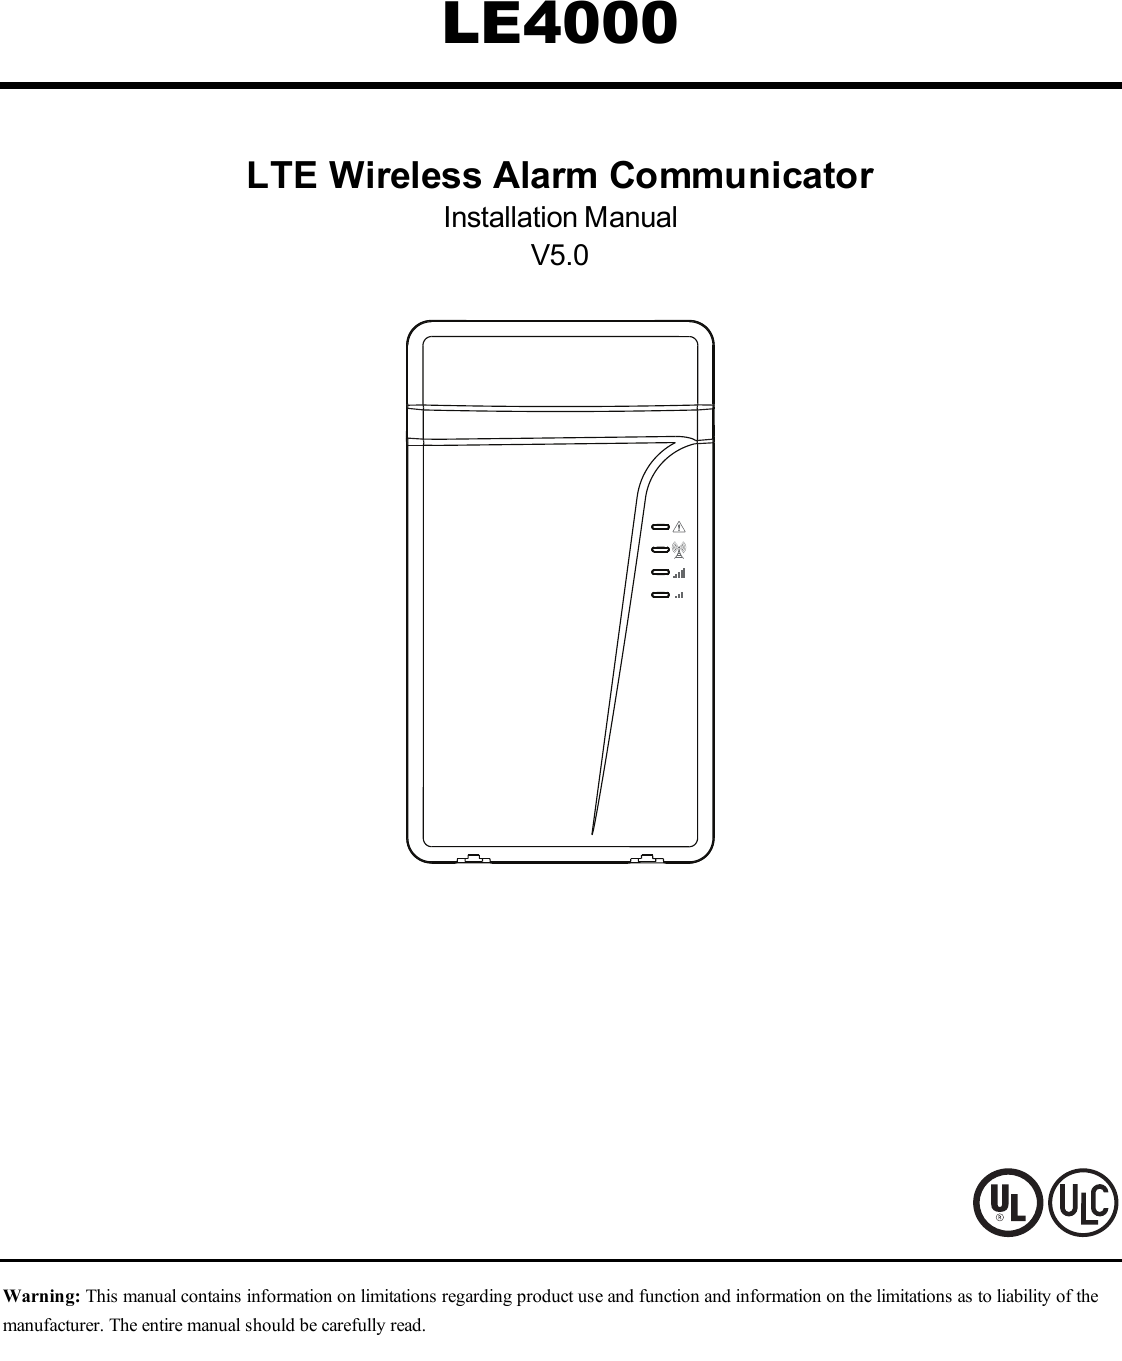 LE4000LTE Wireless Alarm CommunicatorInstallation ManualV5.0Warning: This manual contains information on limitations regarding product use and function and information on the limitations as to liability of themanufacturer. The entire manual should be carefully read.